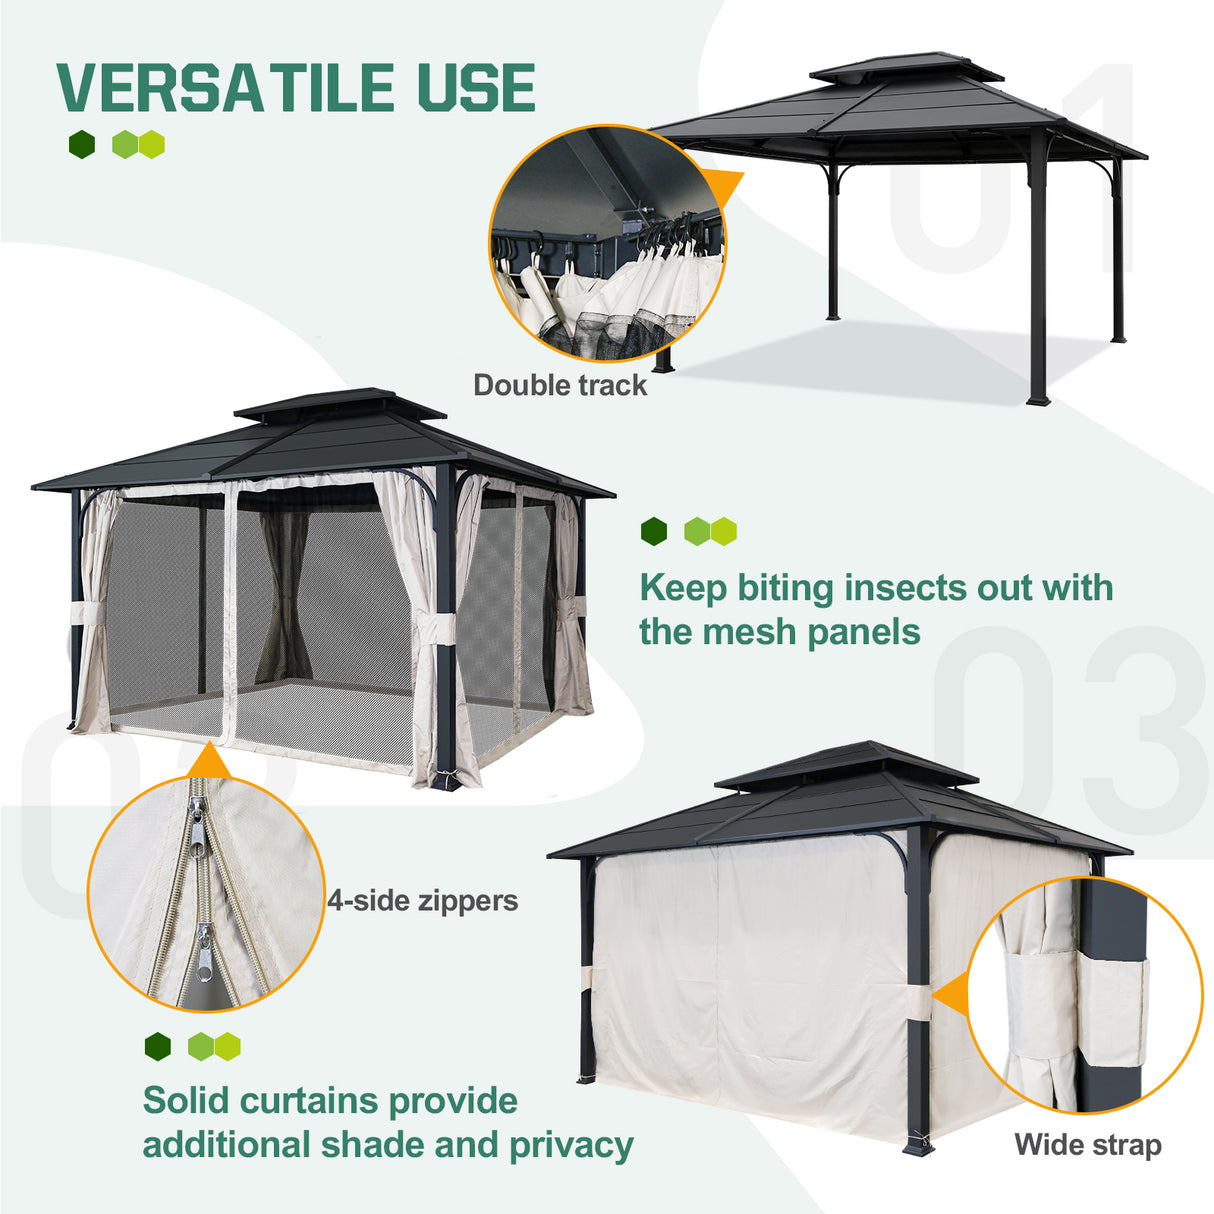 EAGLE PEAK 12x14 Outdoor Permanent Double Roof Hardtop Gazebo with Arched Corner Steel Frame, Mosquito Mesh Netting and Light Beige Privacy Curtains, Backyard Patio Garden Gazebo Pavilion, Black